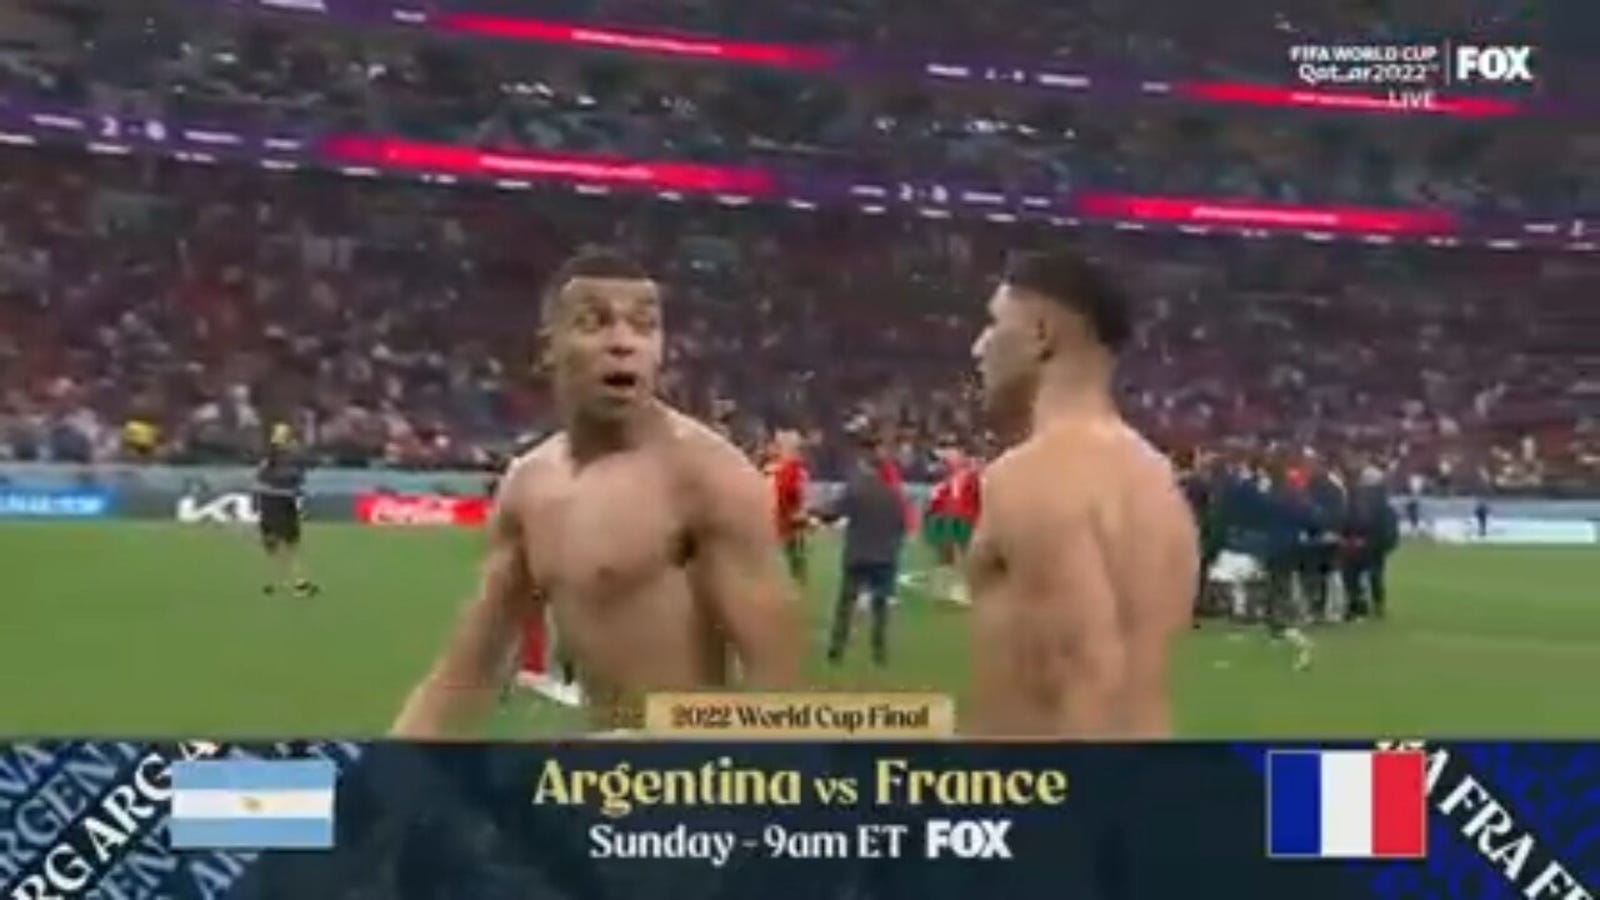 Kylian Mbappé and France celebrate after advancing to the 2022 FIFA World Cup final